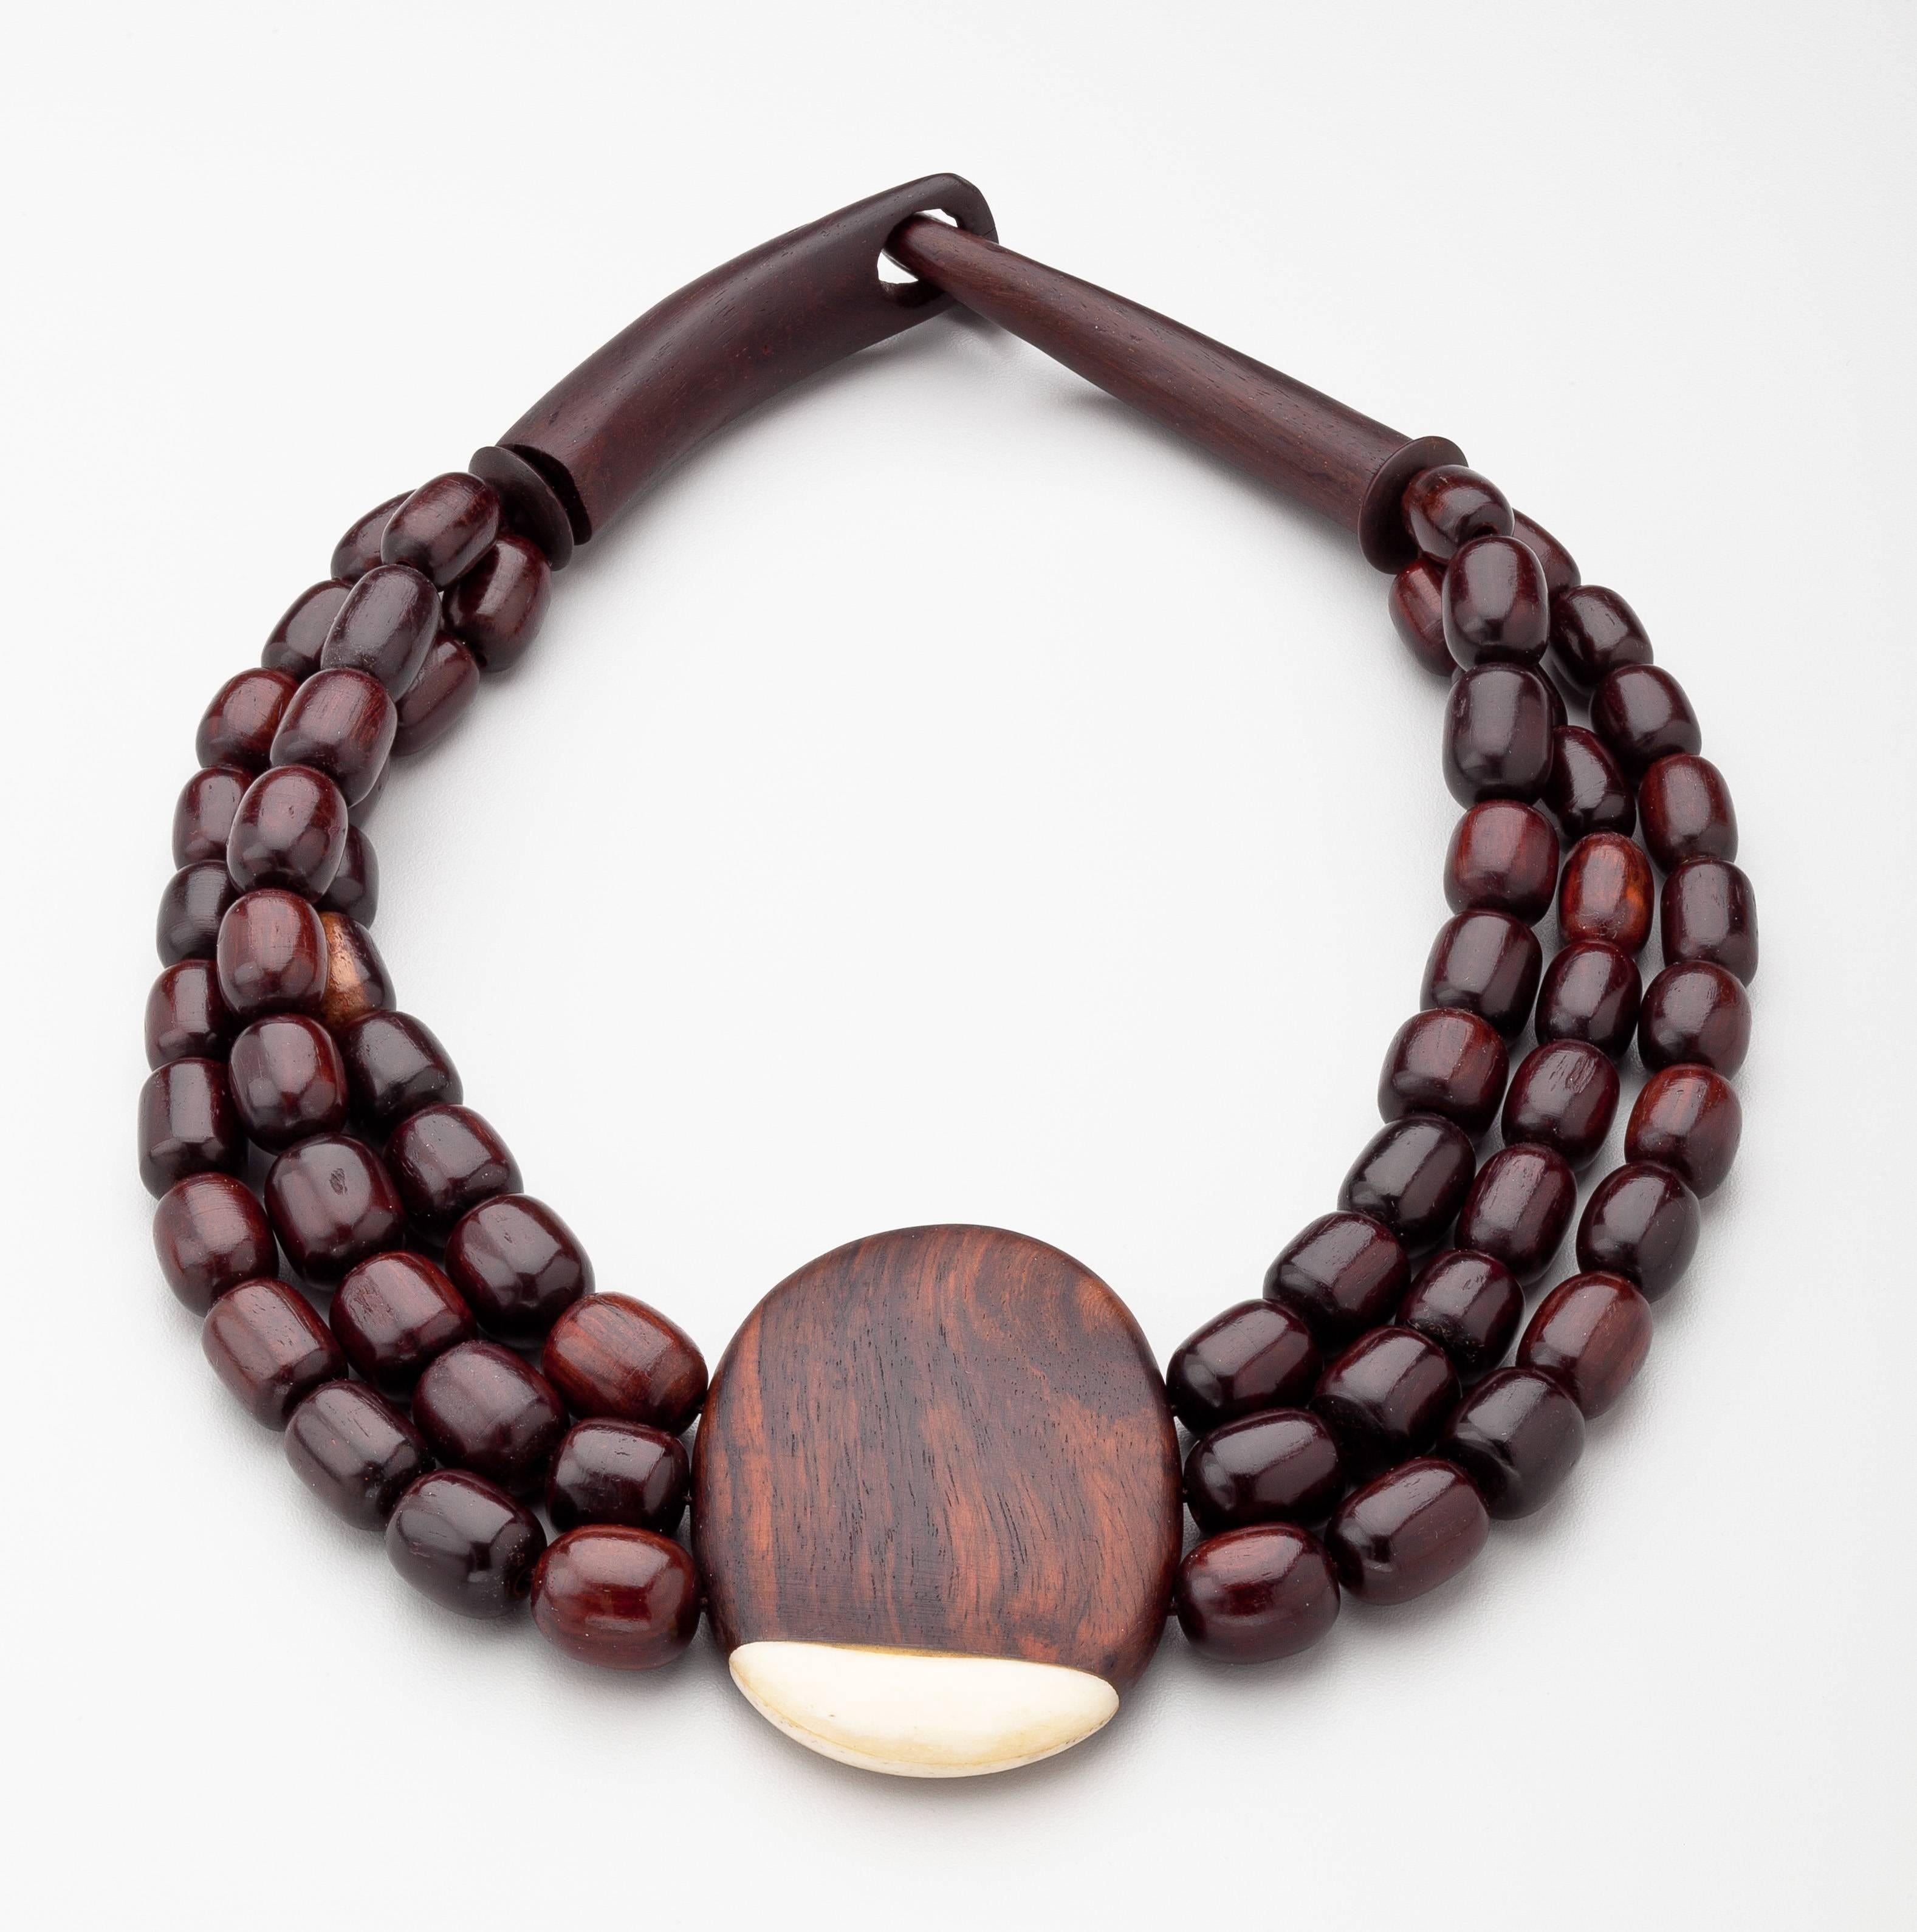 A triple strand ebony necklace by Catherine Noll (1945 - 1992)  the French designer of haute couture jewelry.  The lozenge shaped wood beads suspend a disc of wood with a small highlight of ivory.  This necklace has the iconic Catherine Noll hook